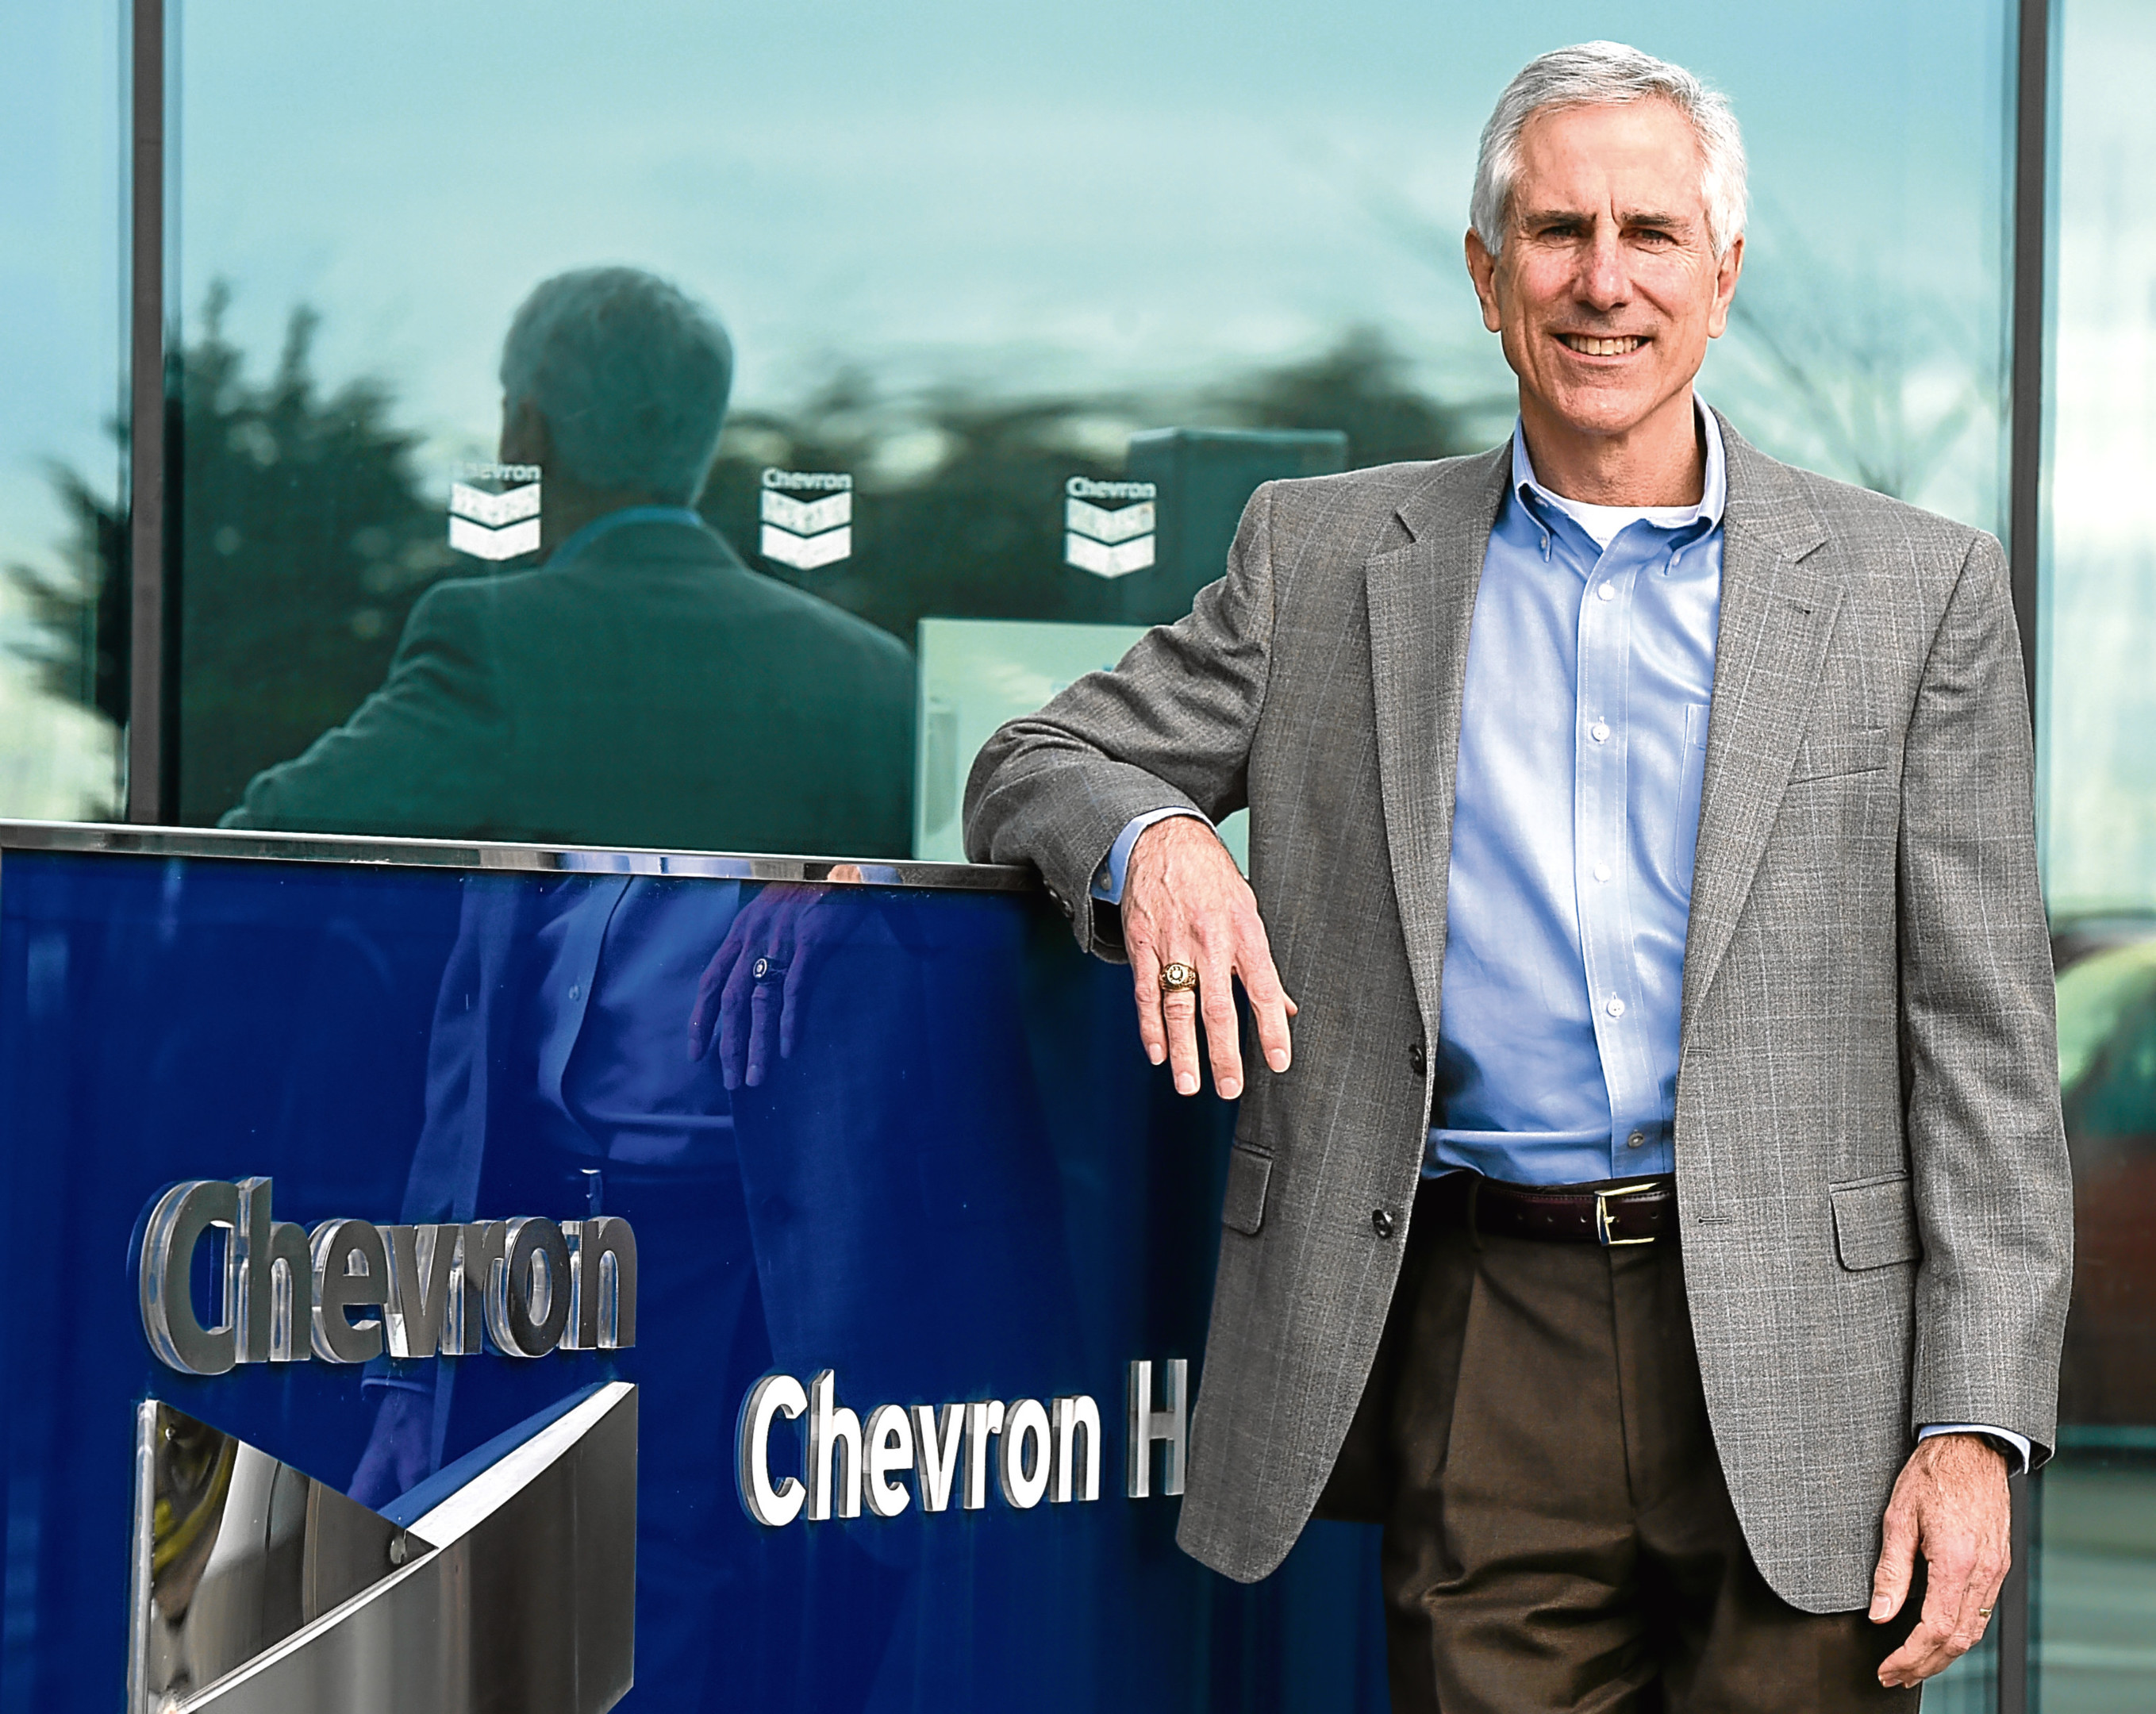 Kevin Ricketts, general manager of Chevron Upstream Europe